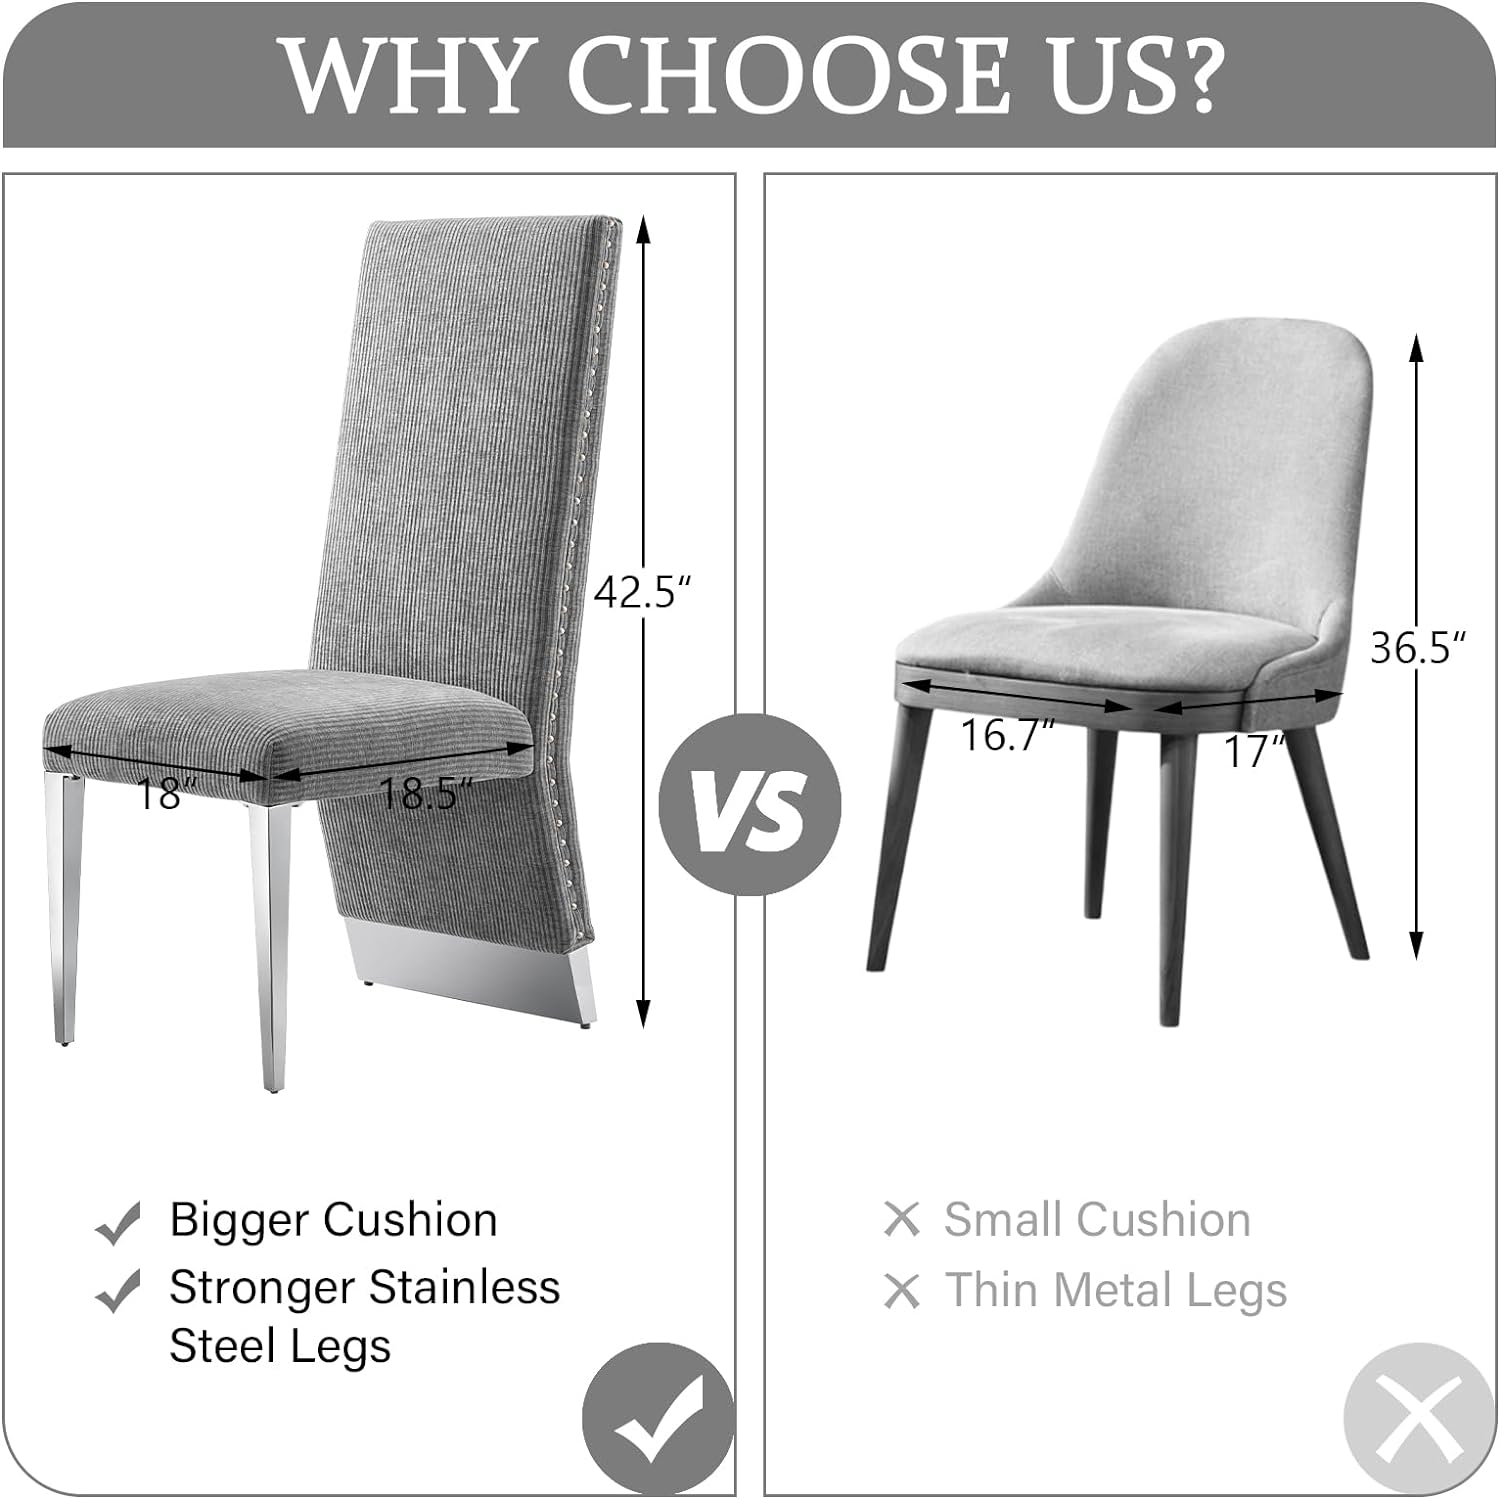 Wholesale Gray Fabric Dining Chairs